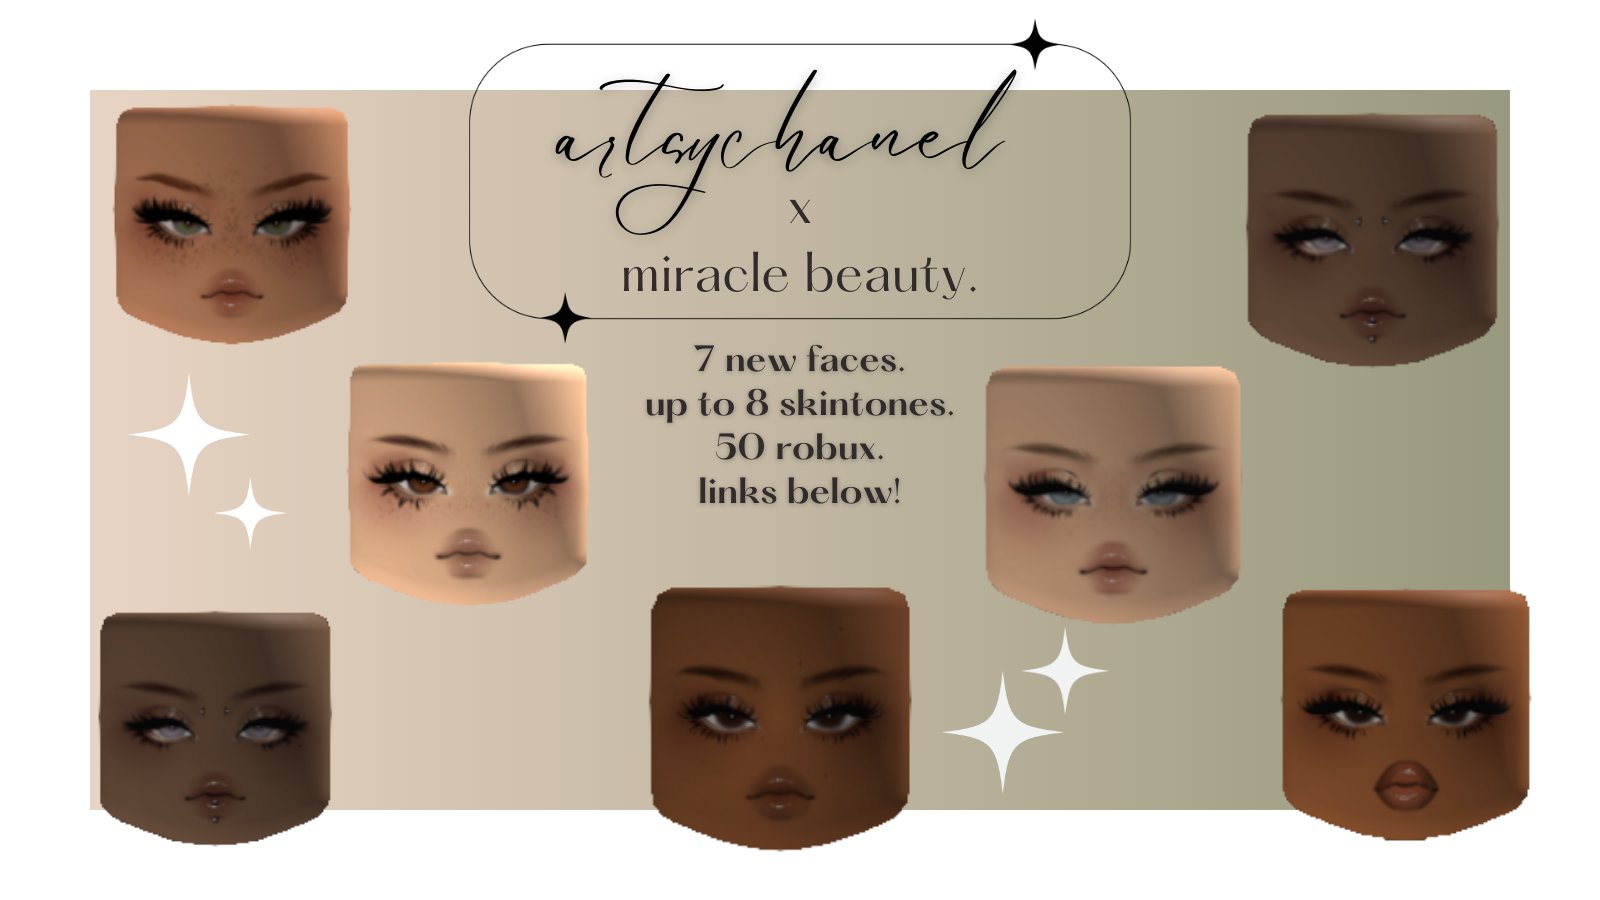 Popular Girl Face with Beauty Mark in Tan - Roblox